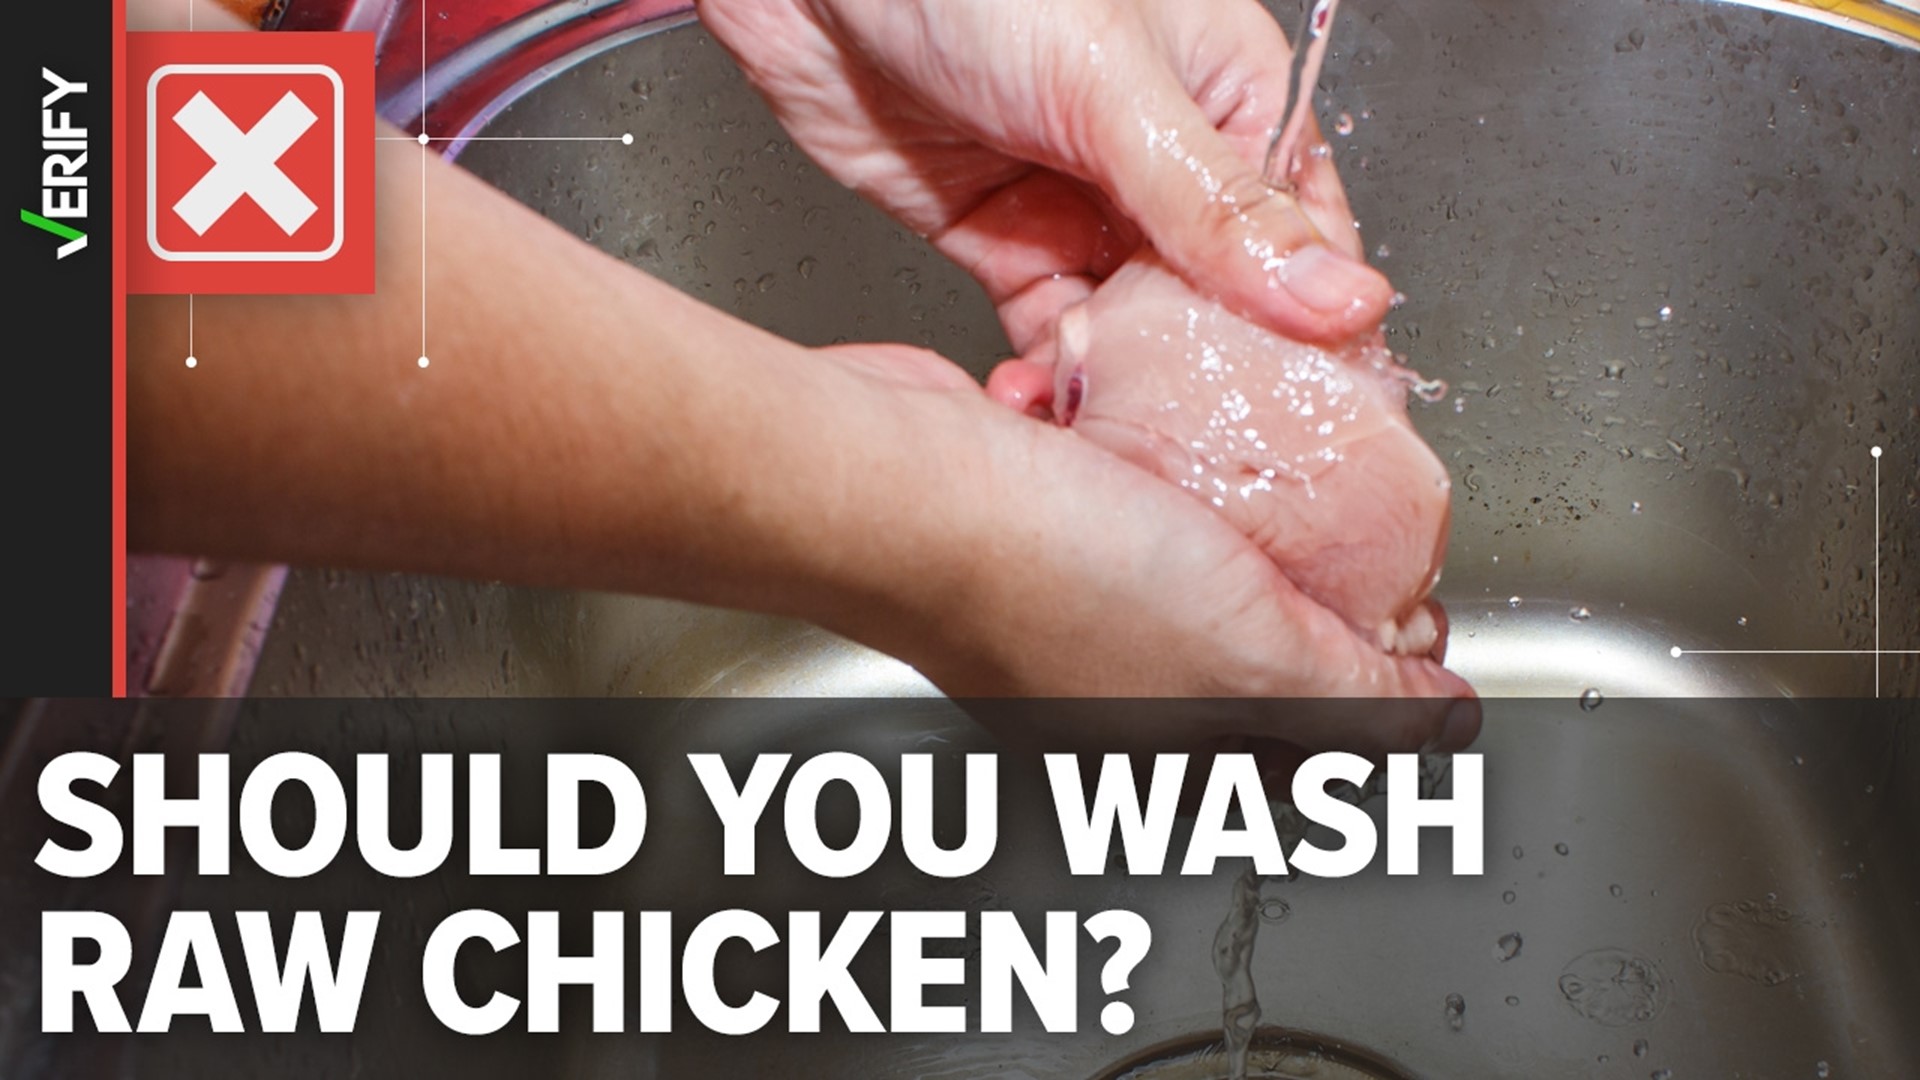 Food safety experts don’t recommend washing raw chicken because it increases the risk of cross-contamination in the kitchen, which can cause foodborne illness.